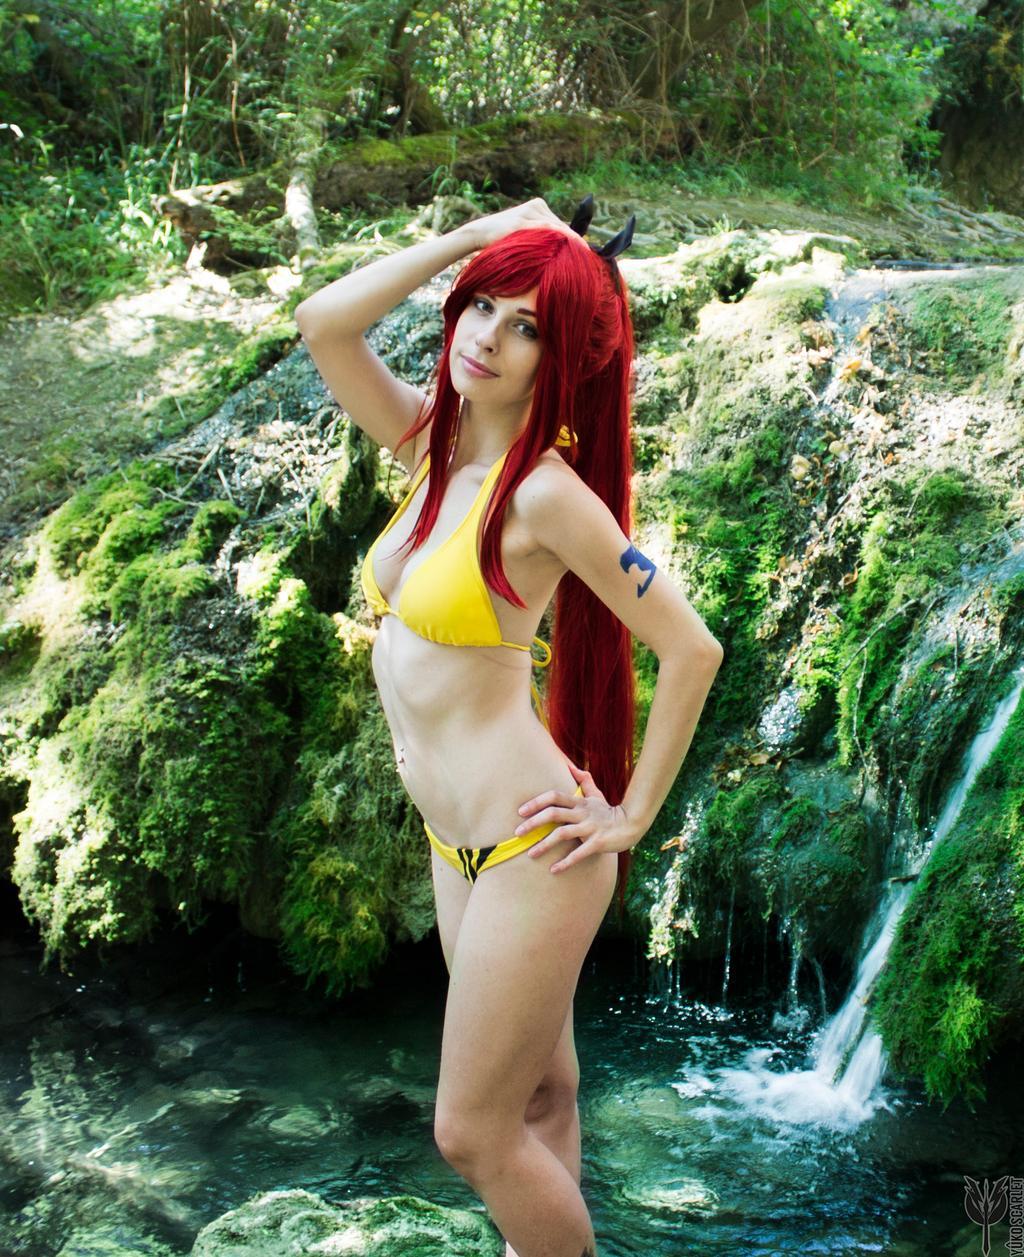 70+ Hot Pictures Of Erza Scarlet from Fairy Tale Which Will Leave You Dumbstruck 167